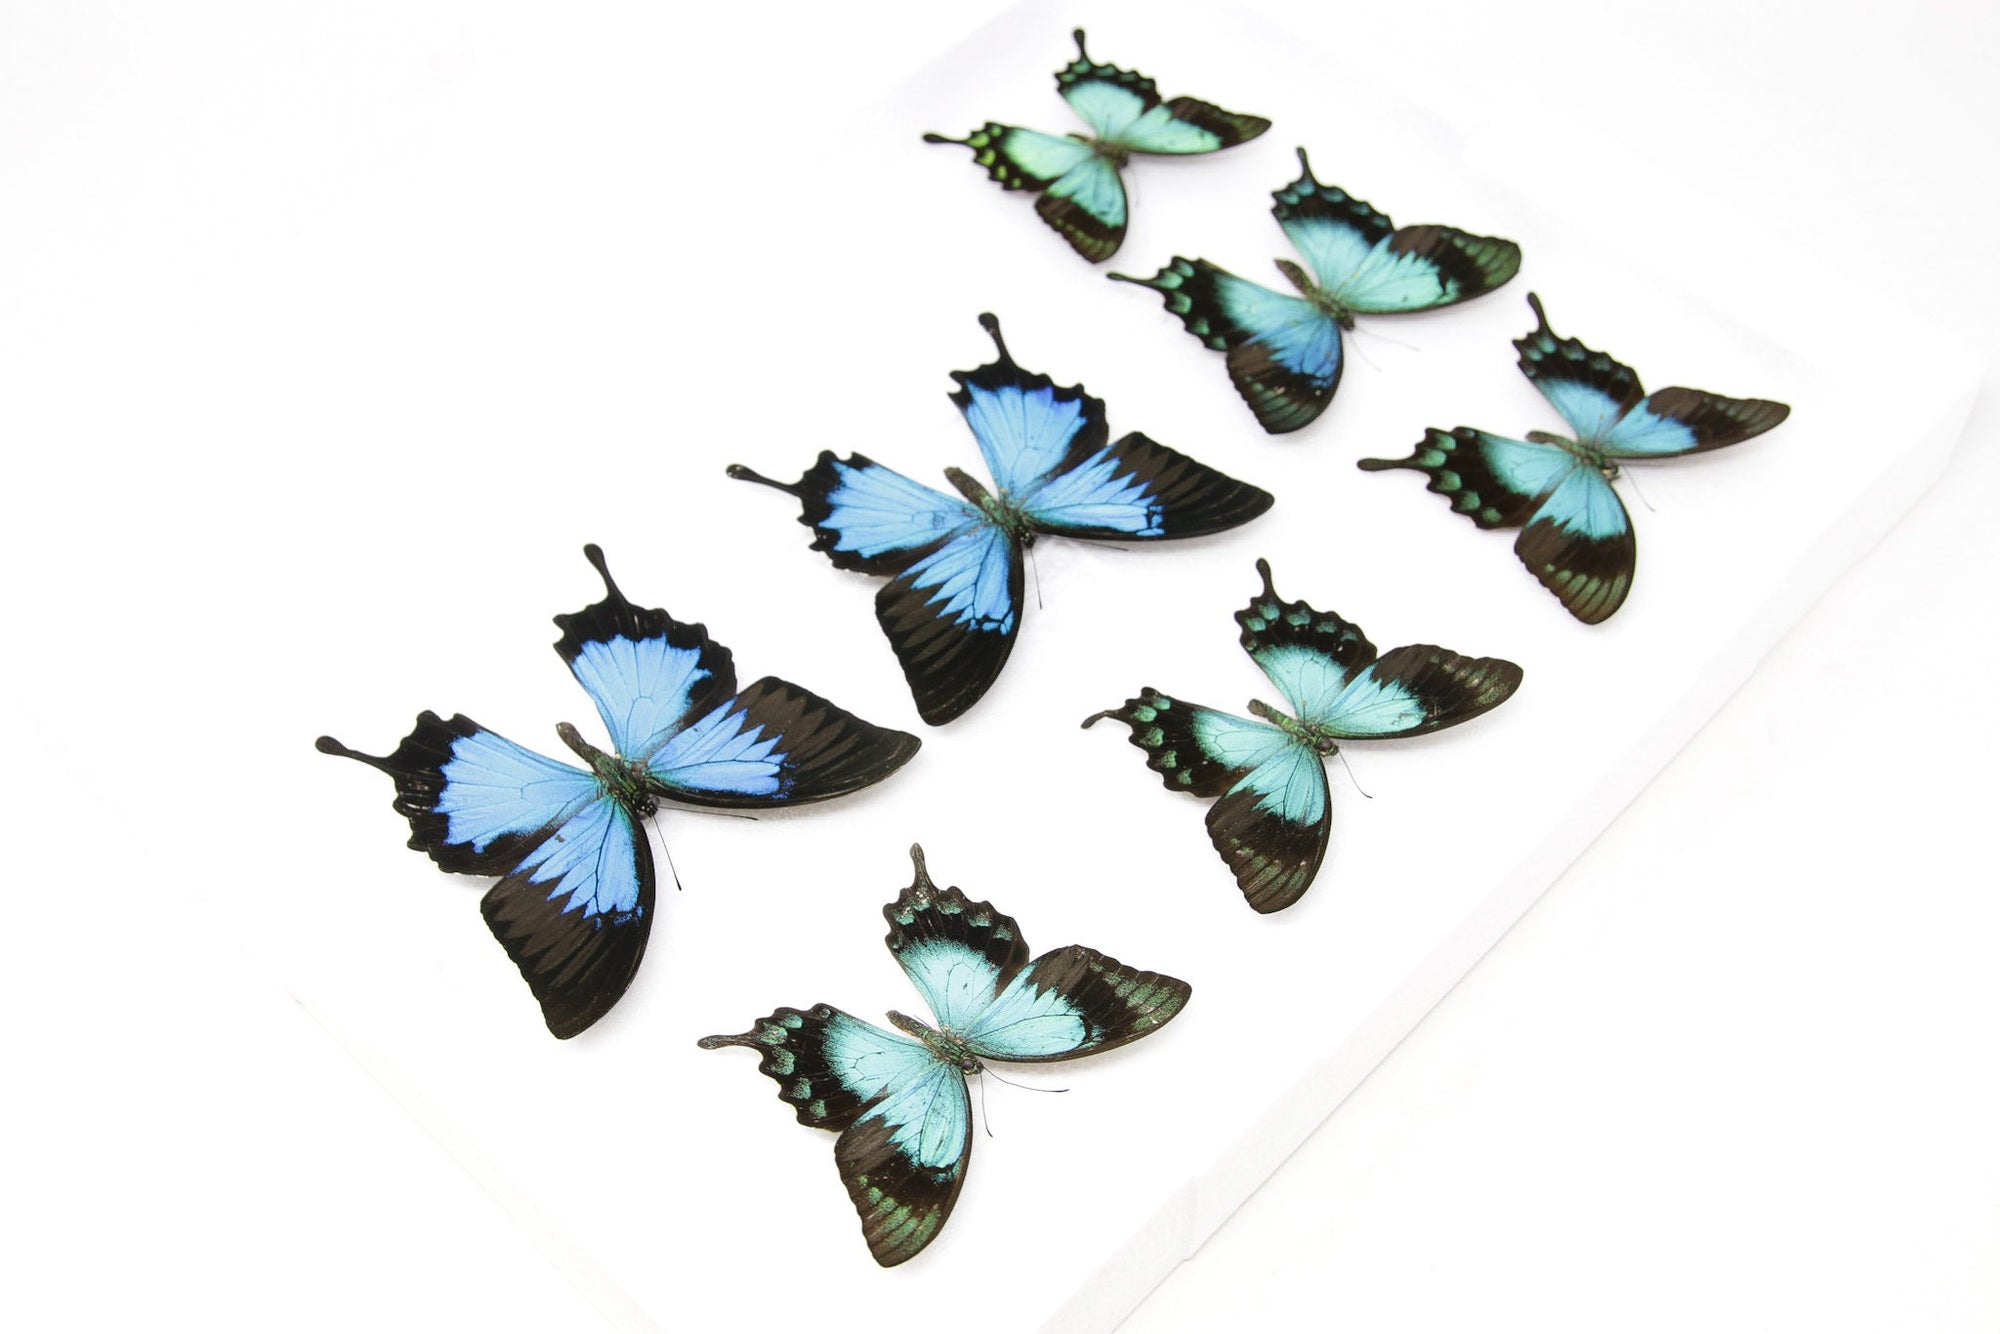 SECONDS (A-/A2) A Collection of Papilio Swallowtail Butterflies, Pinned Spread Entomology Taxidermy Specimens